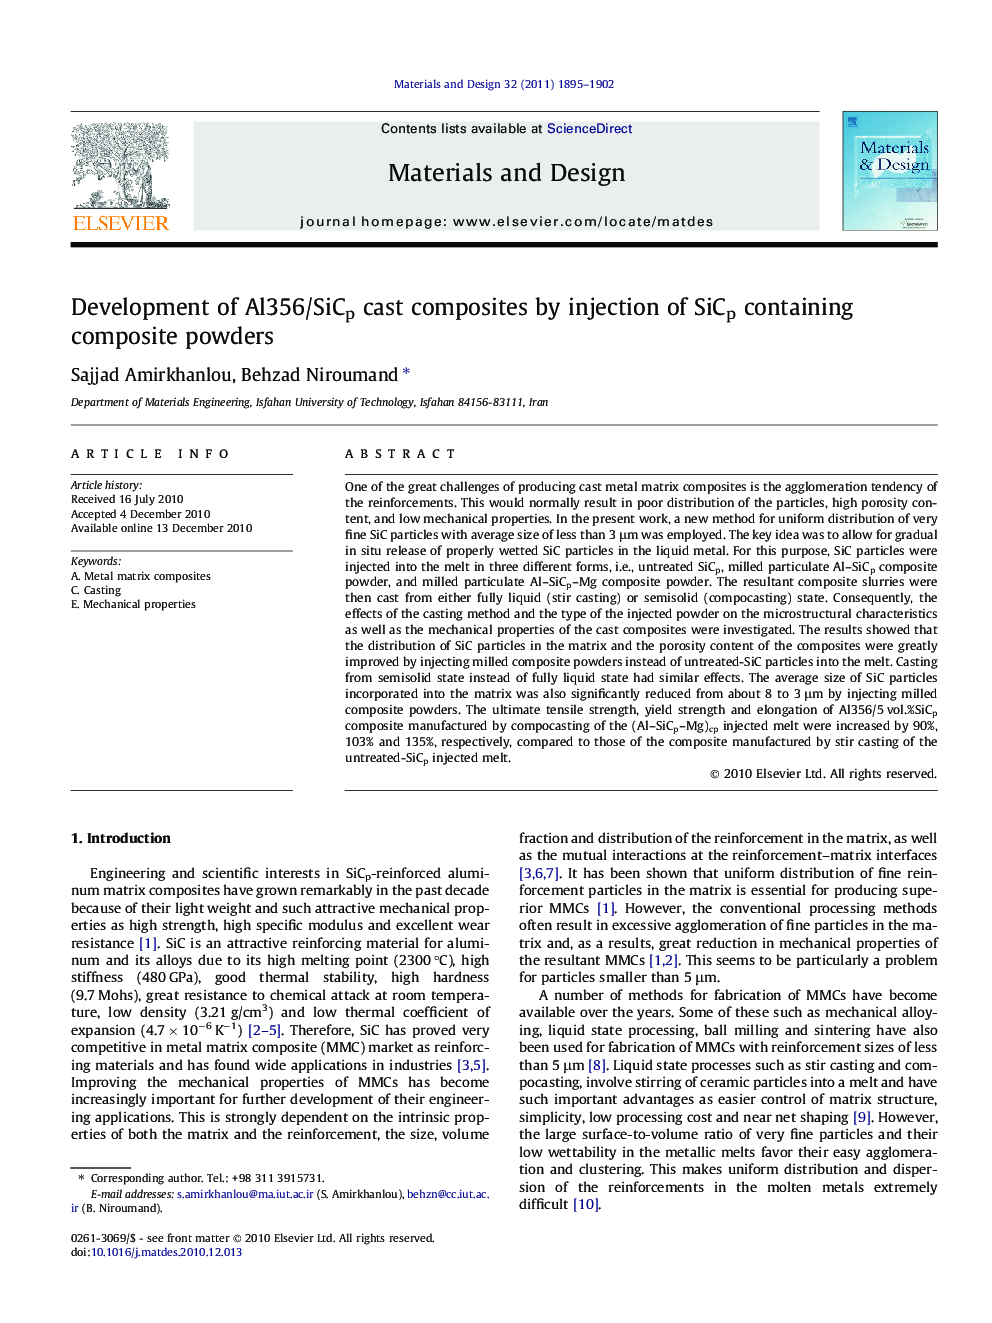 Development of Al356/SiCp cast composites by injection of SiCp containing composite powders